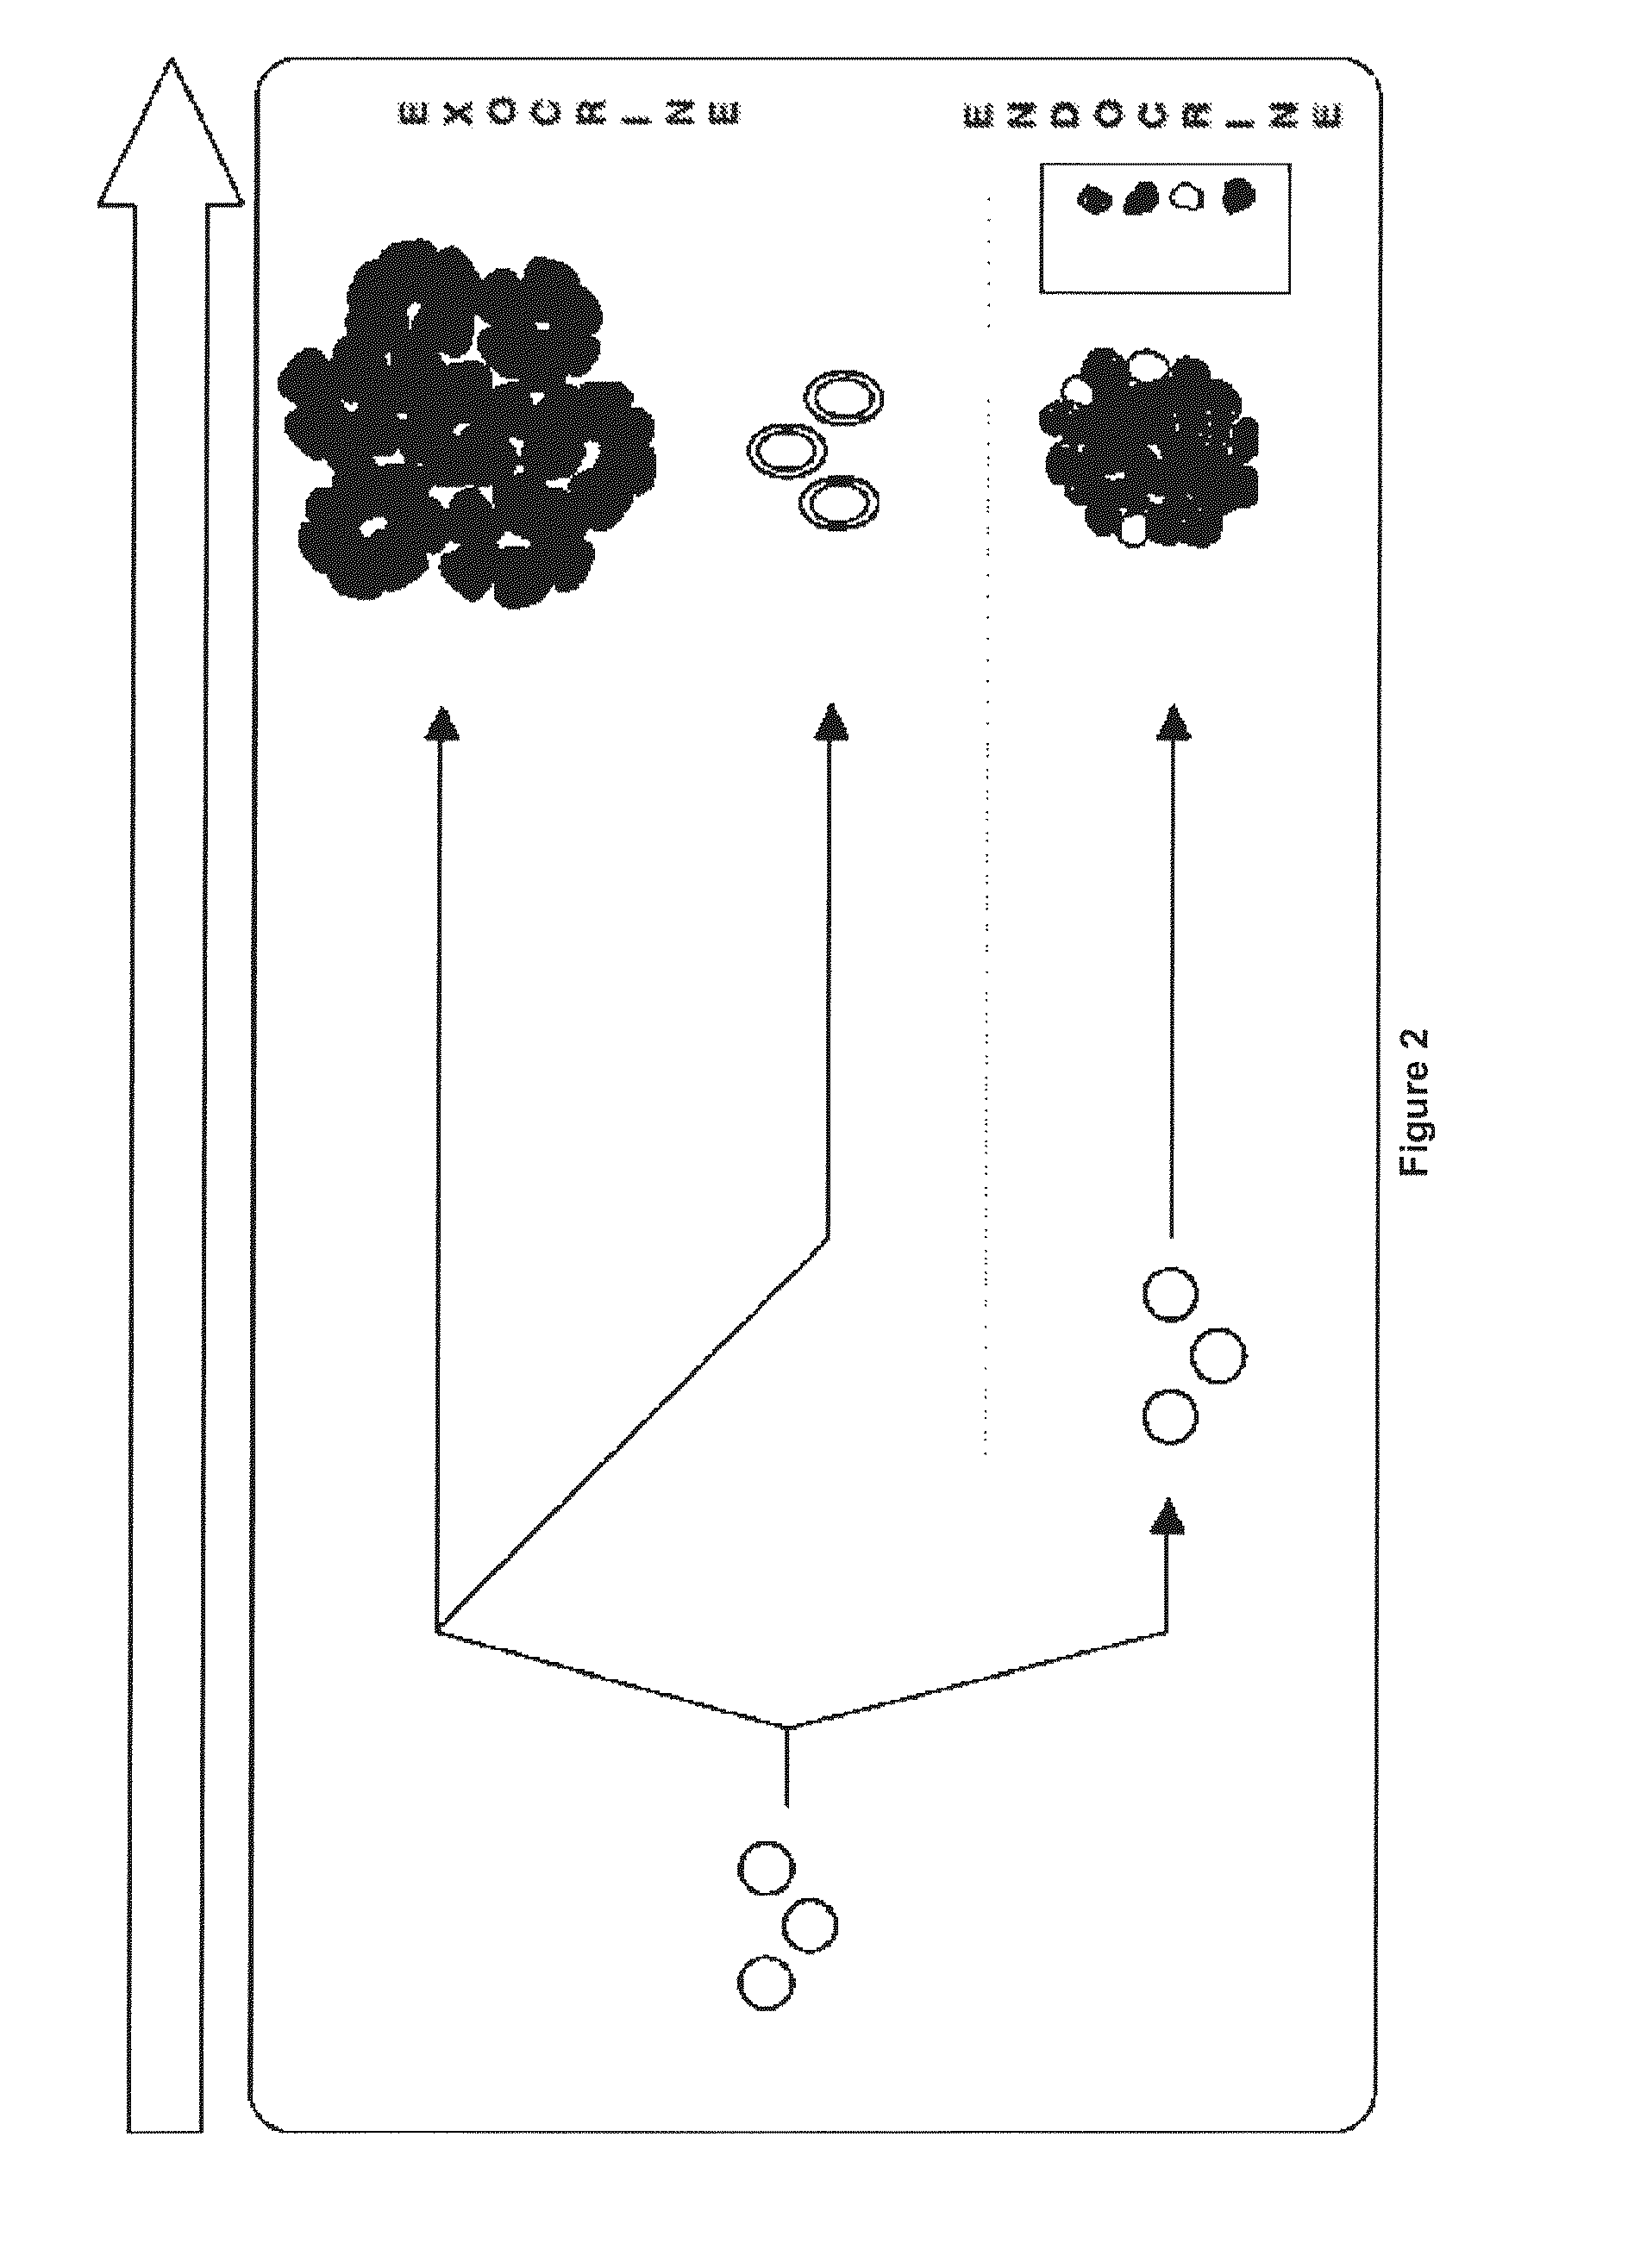 Method for obtaining ngn3-expressing cells and insulin producing-beta cells